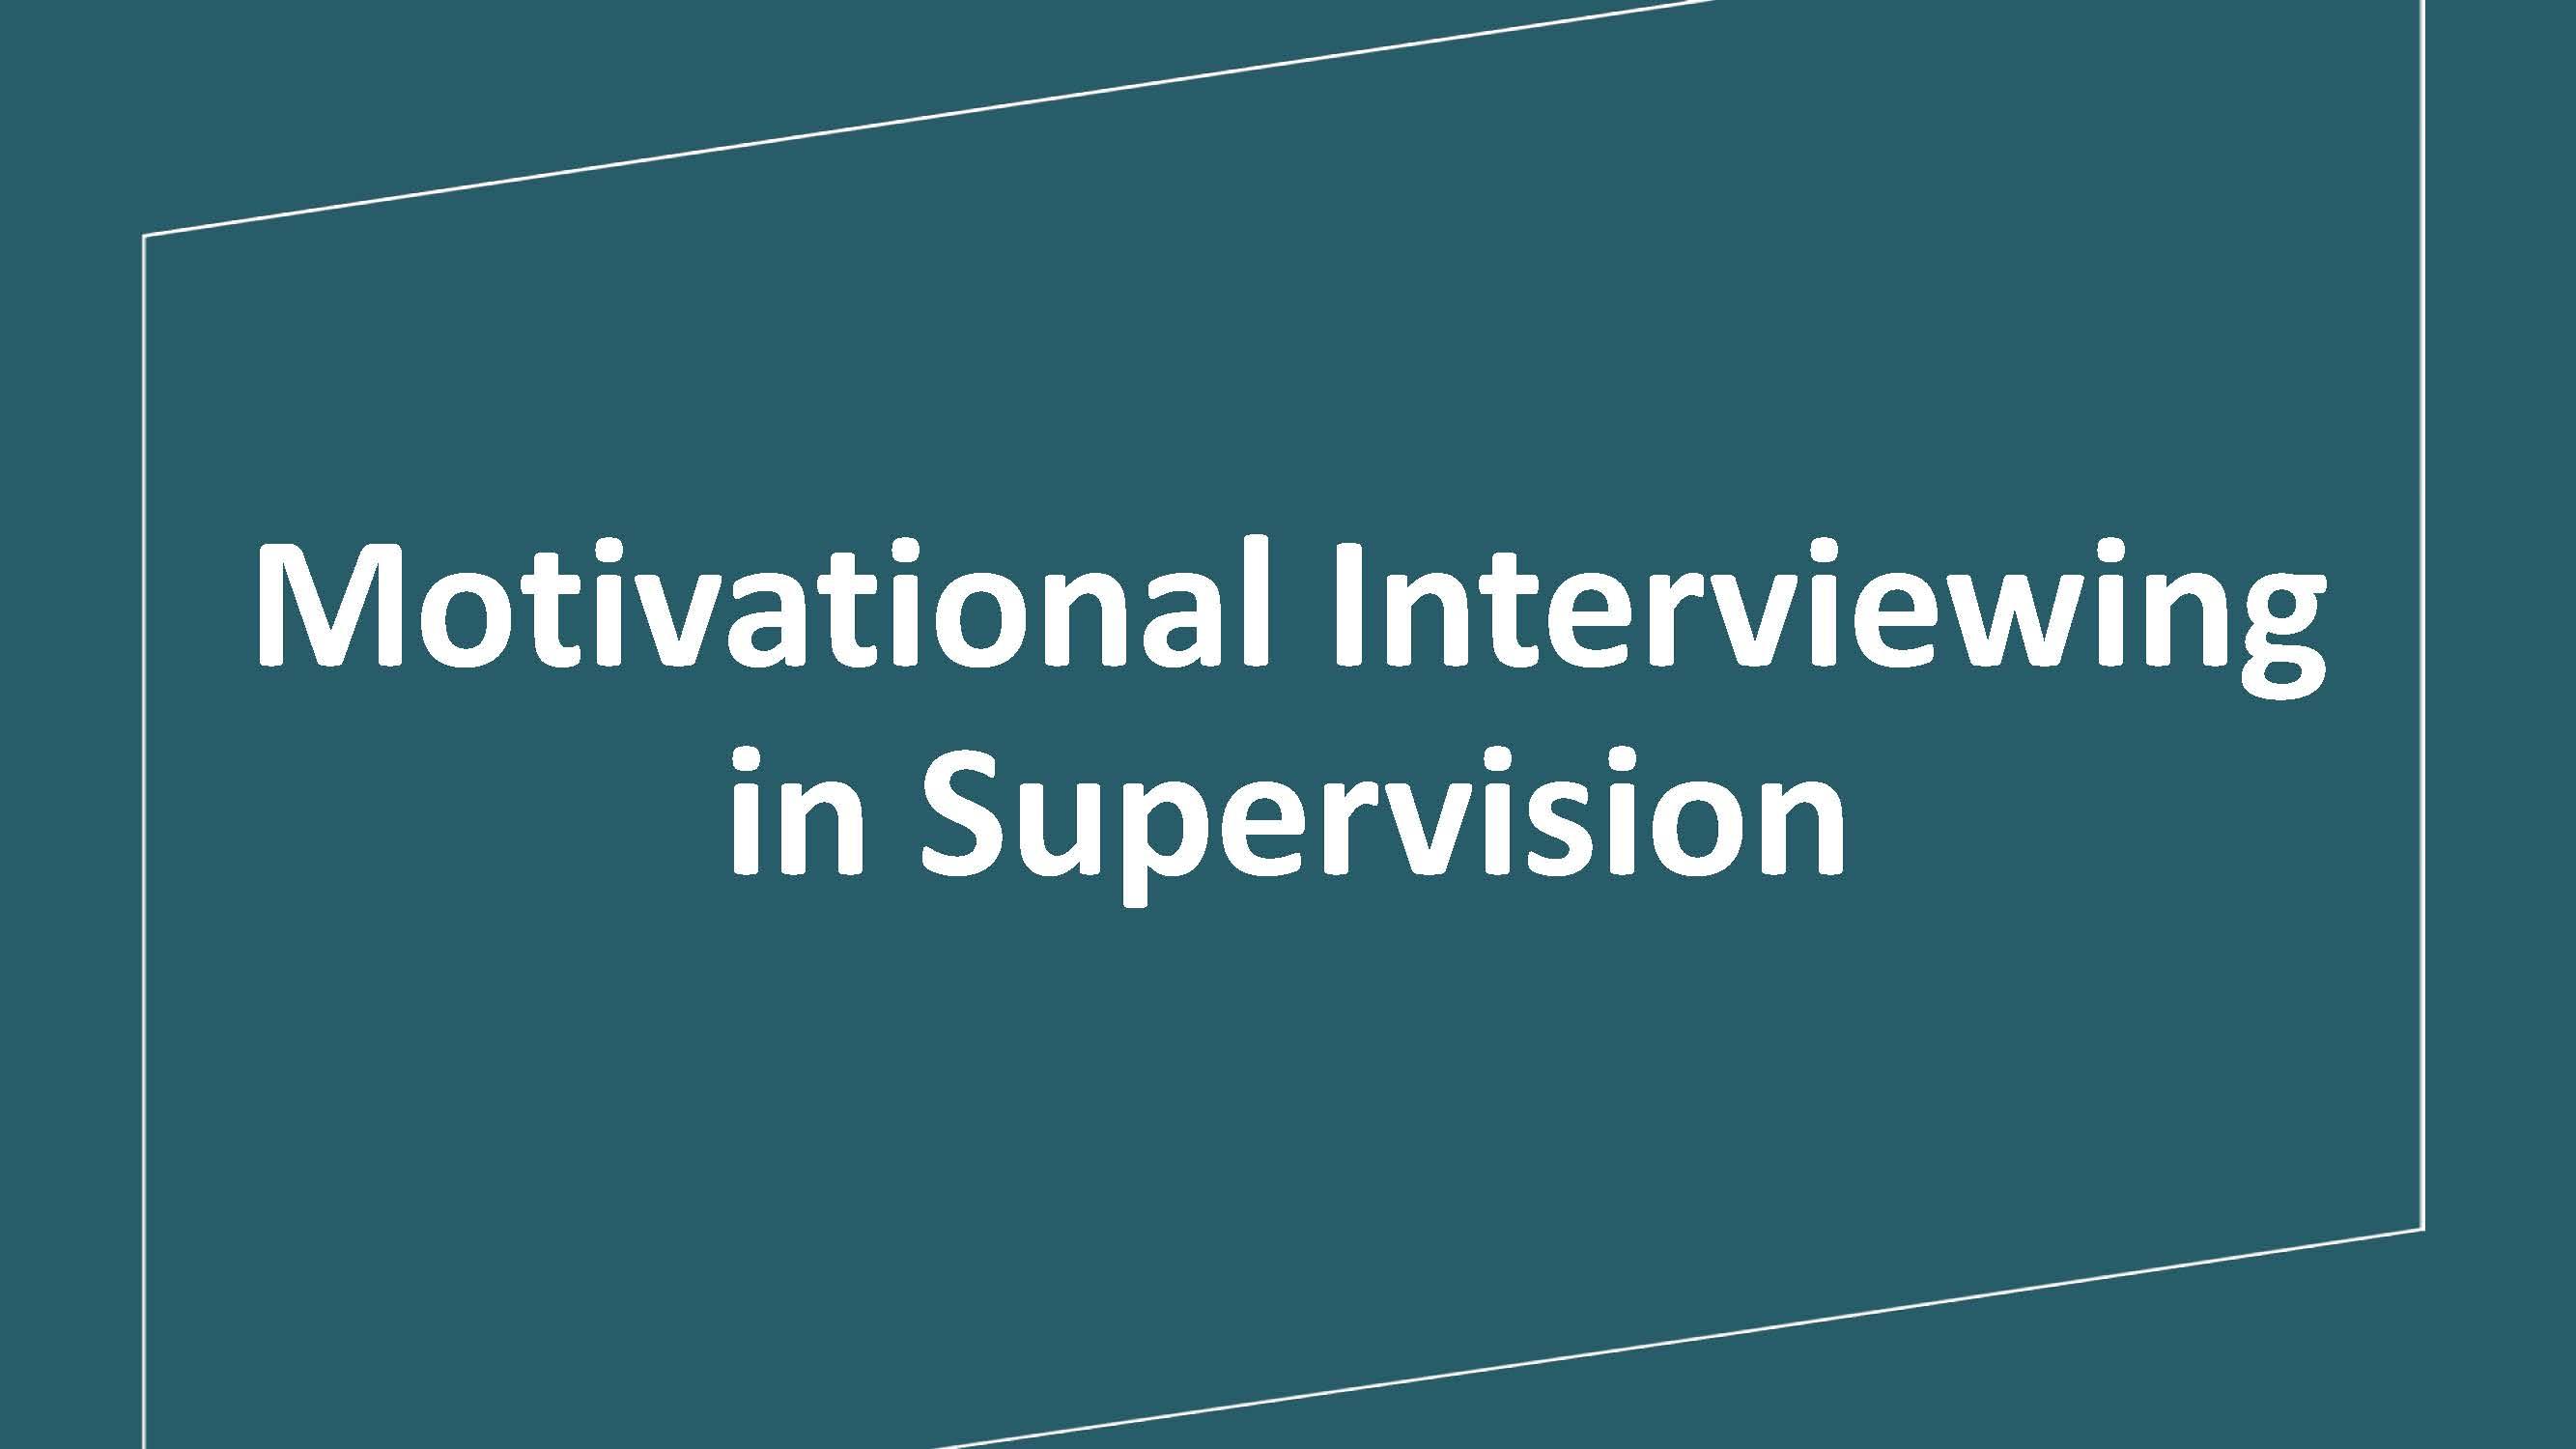 Motivational Interviewing in Supervision